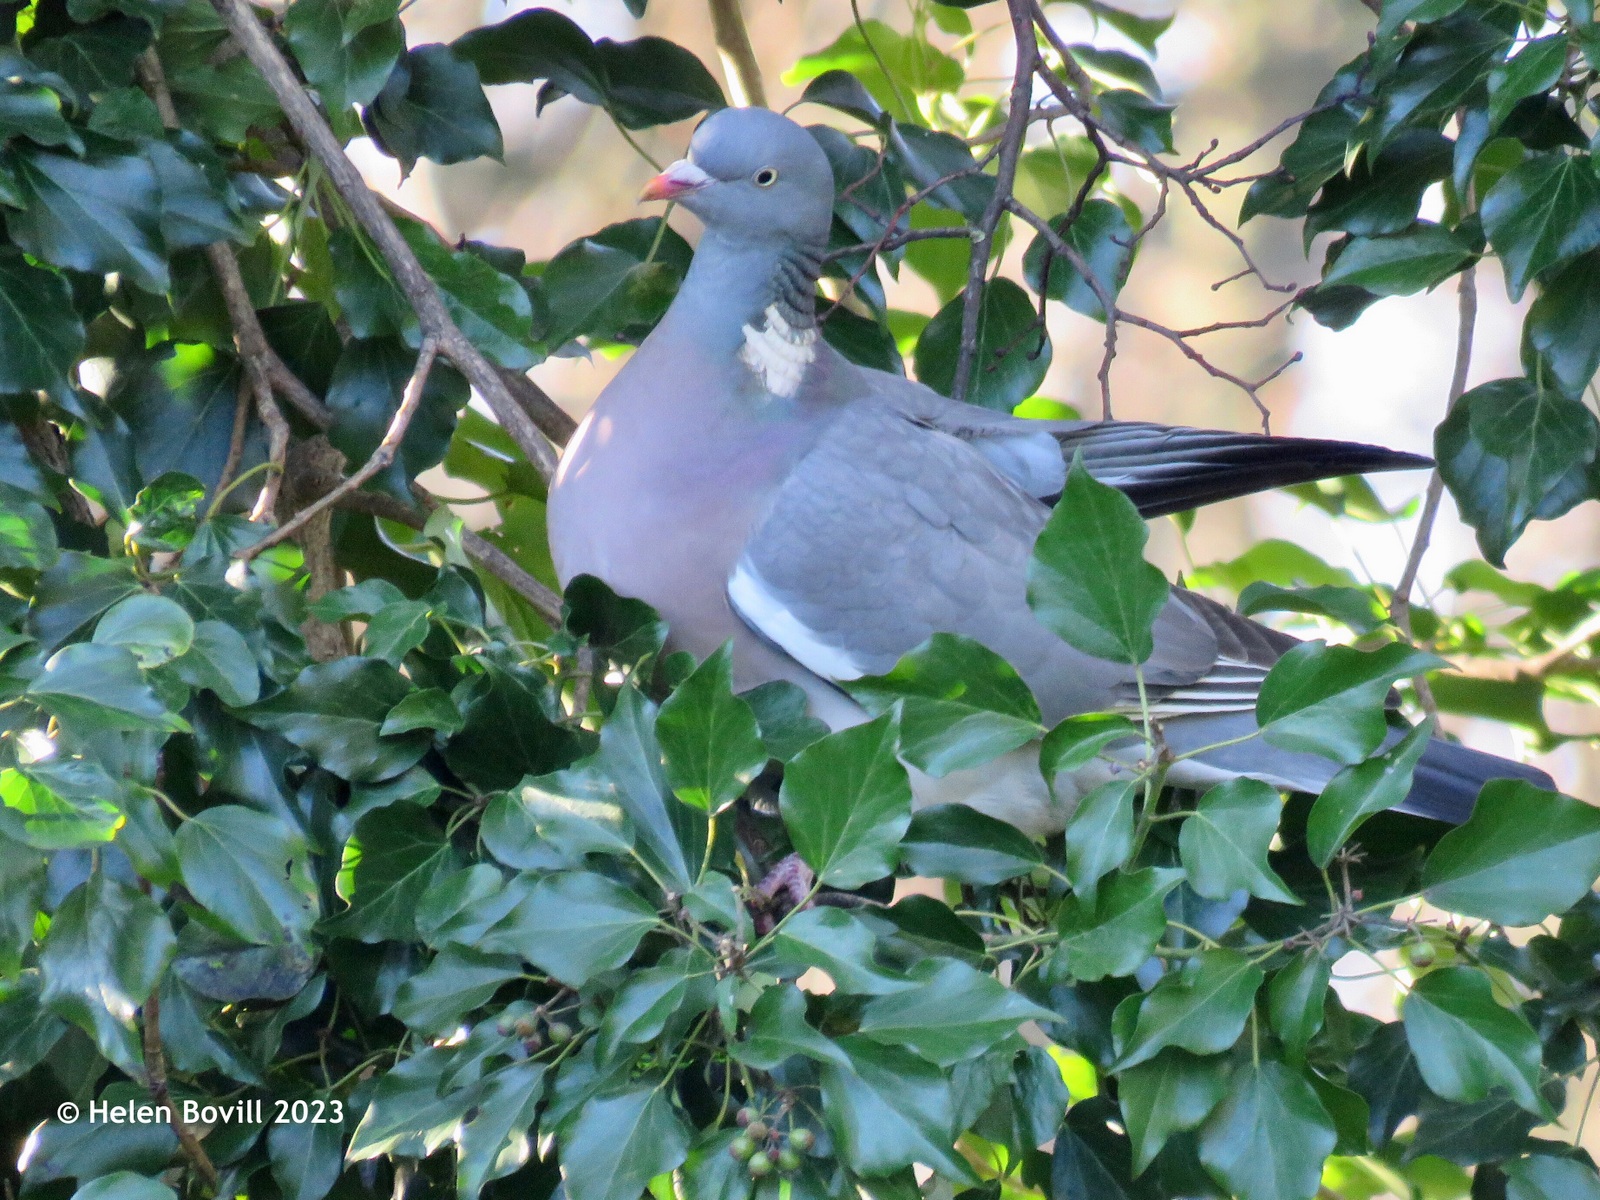 A Wood Pigeon looking for berries on the Ivy